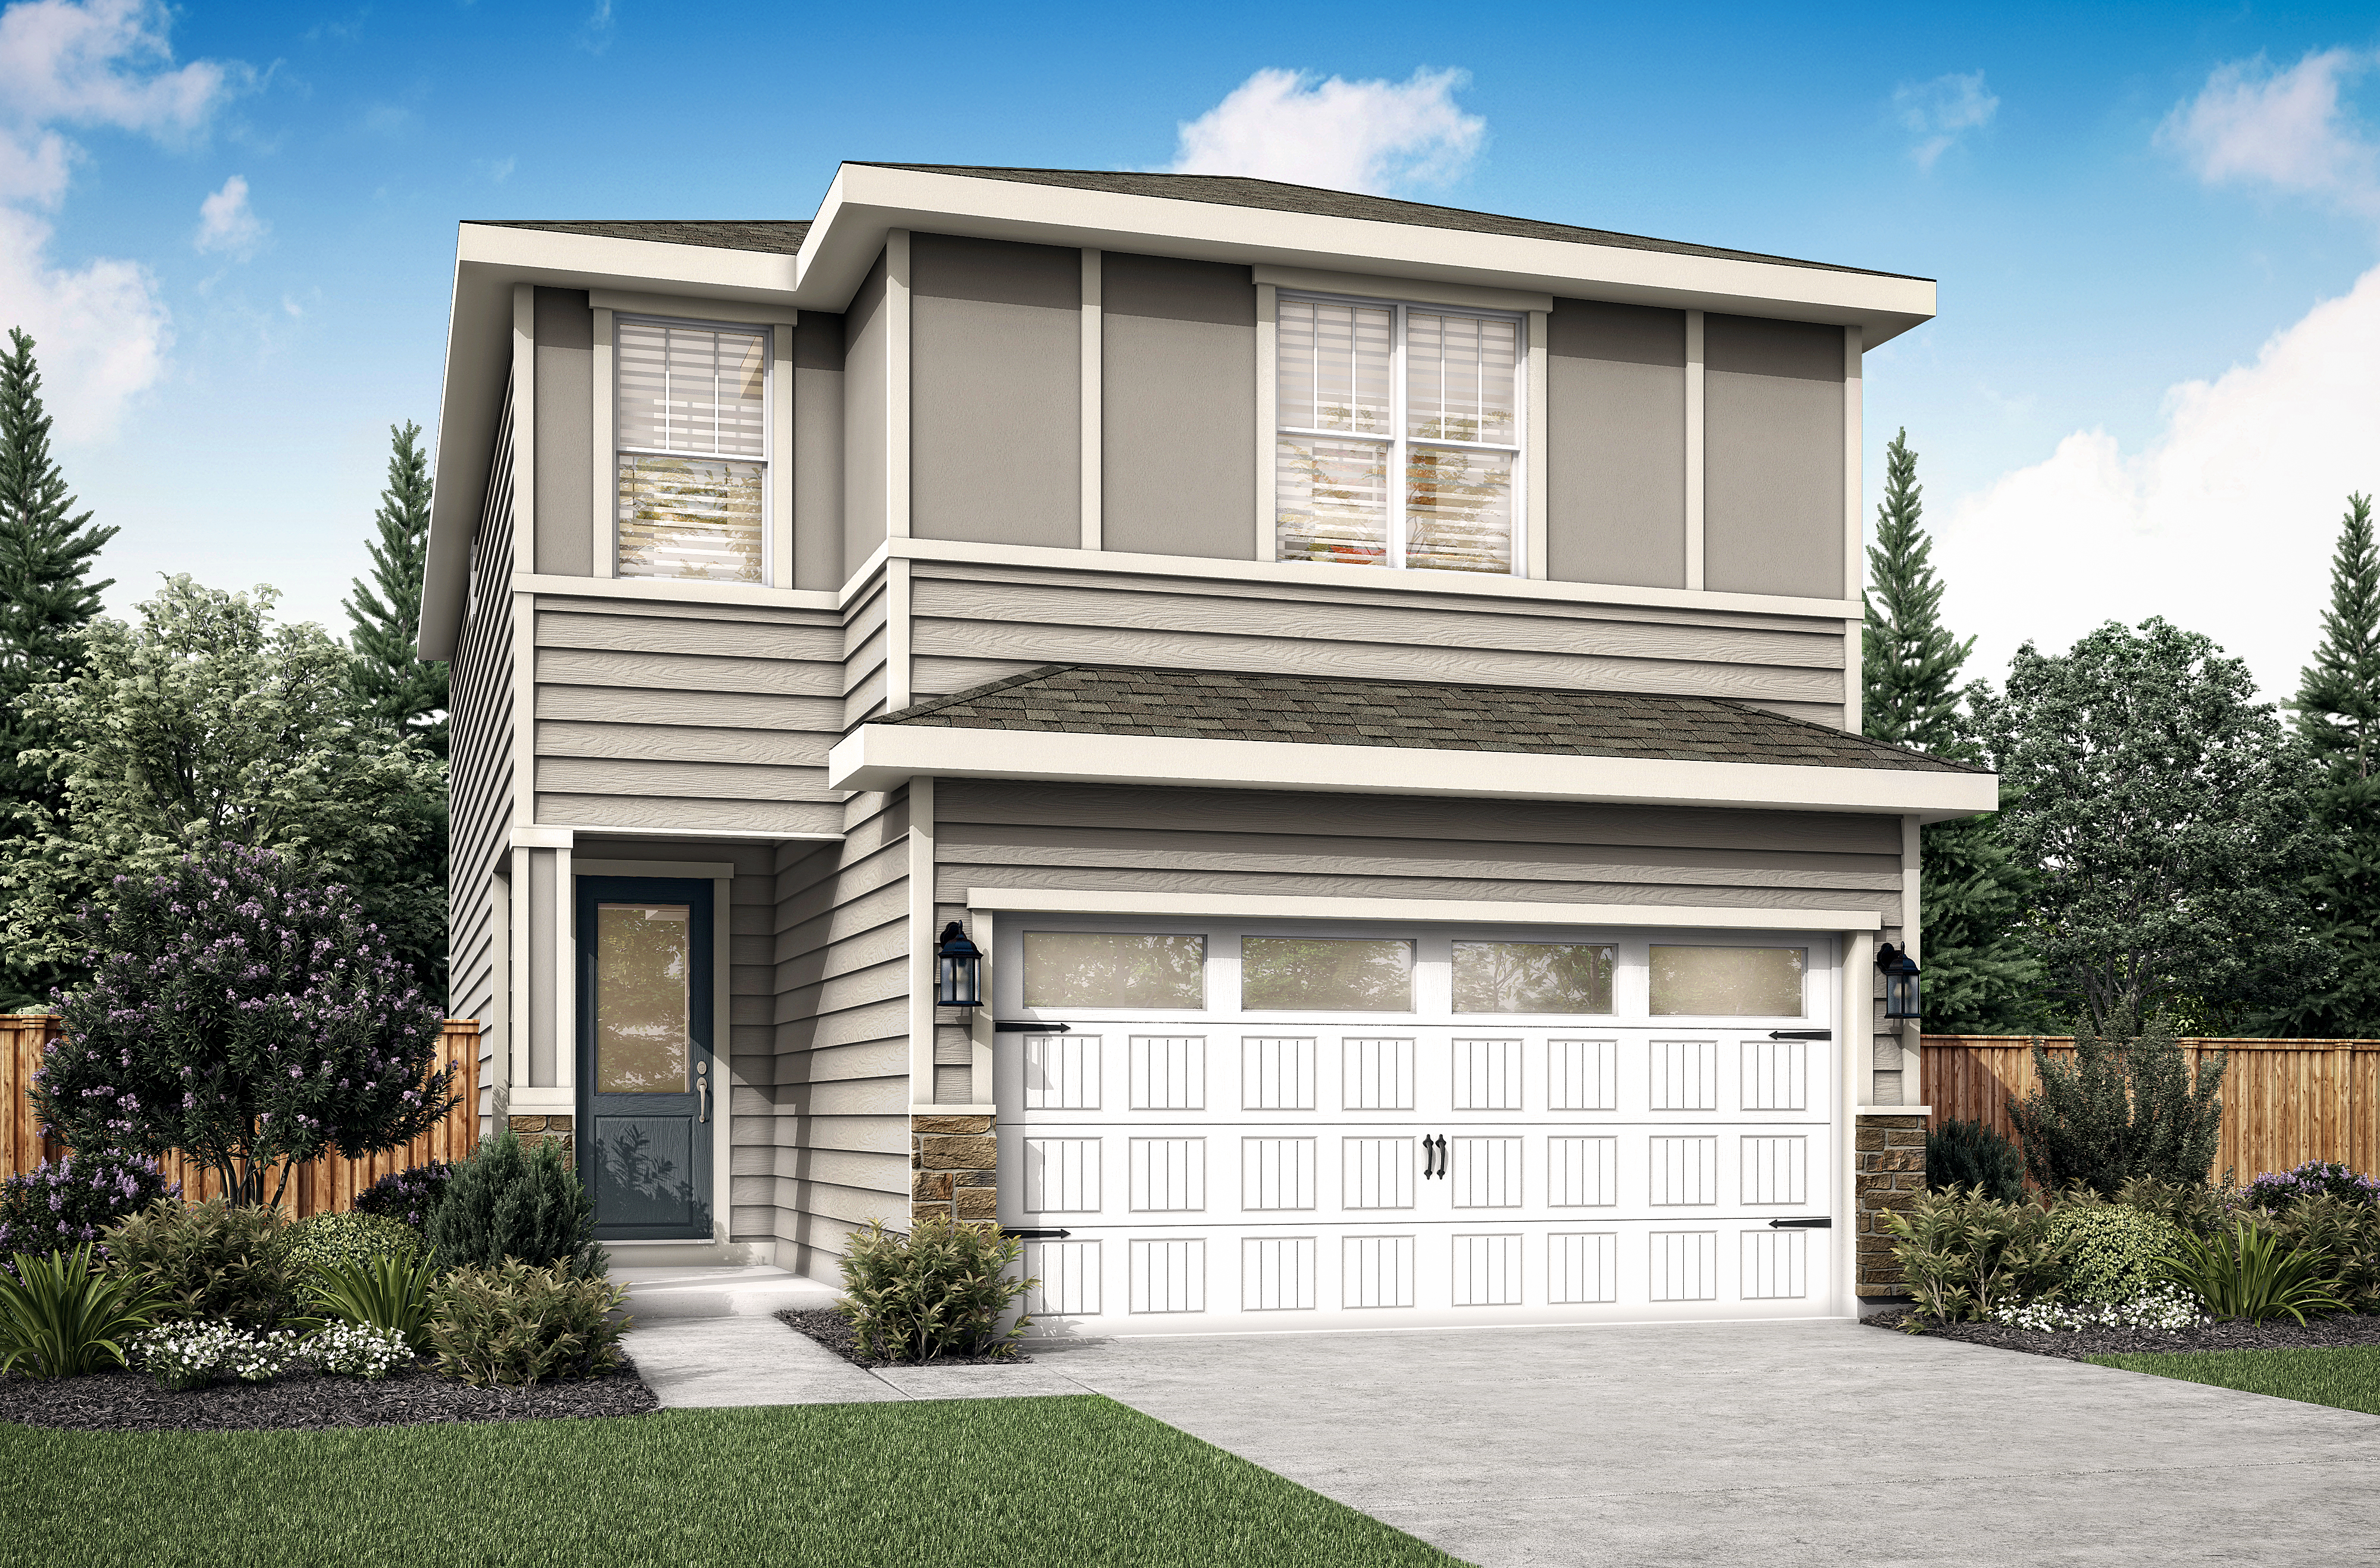 The Helens Plan by LGI Homes at LaLonde Creek in Vancouver, WA features four bedrooms, two-and-a-half bathrooms with a covered porch and patio and an upstairs game room.